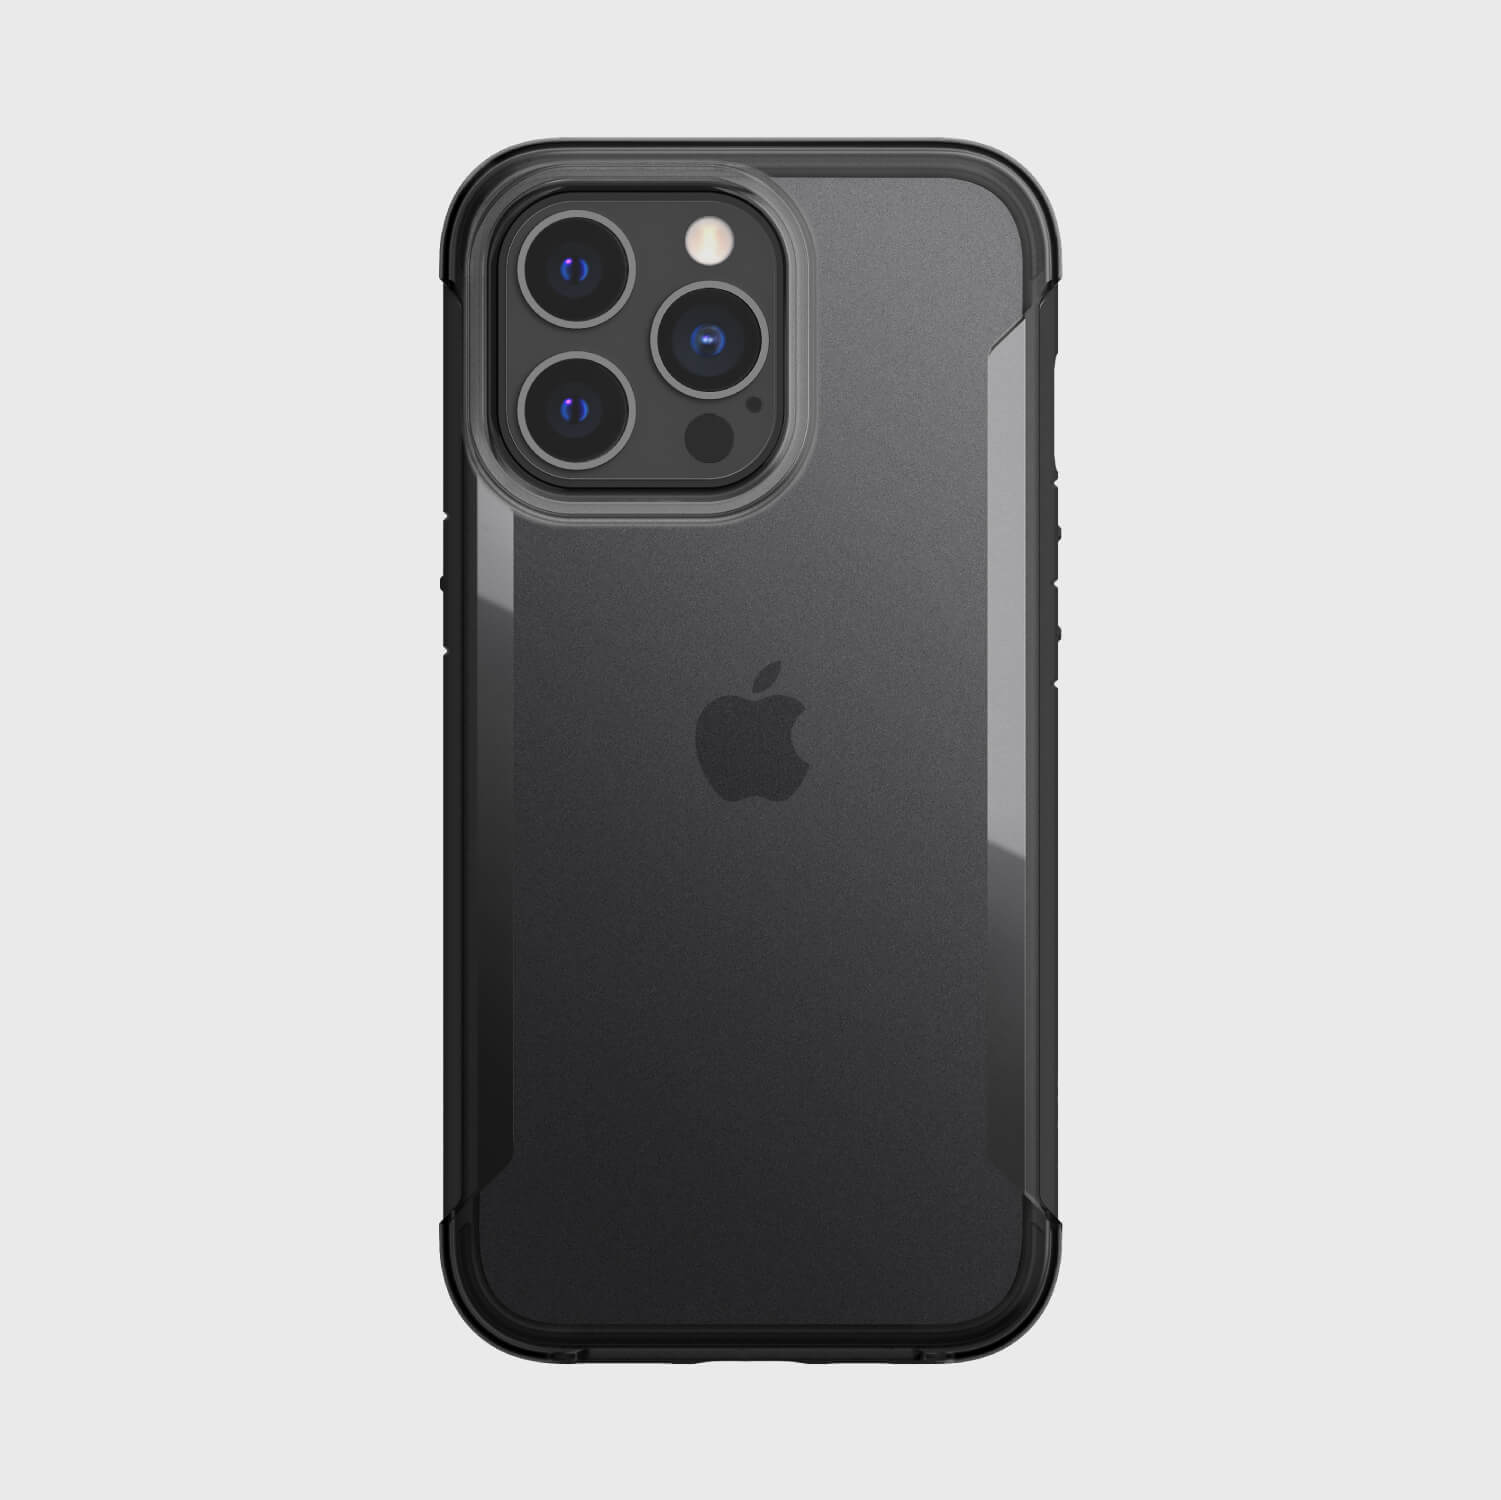 An eco-friendly black iPhone 13 Pro Max case designed to biodegrade instead of ending up in a landfill, produced by Raptic.